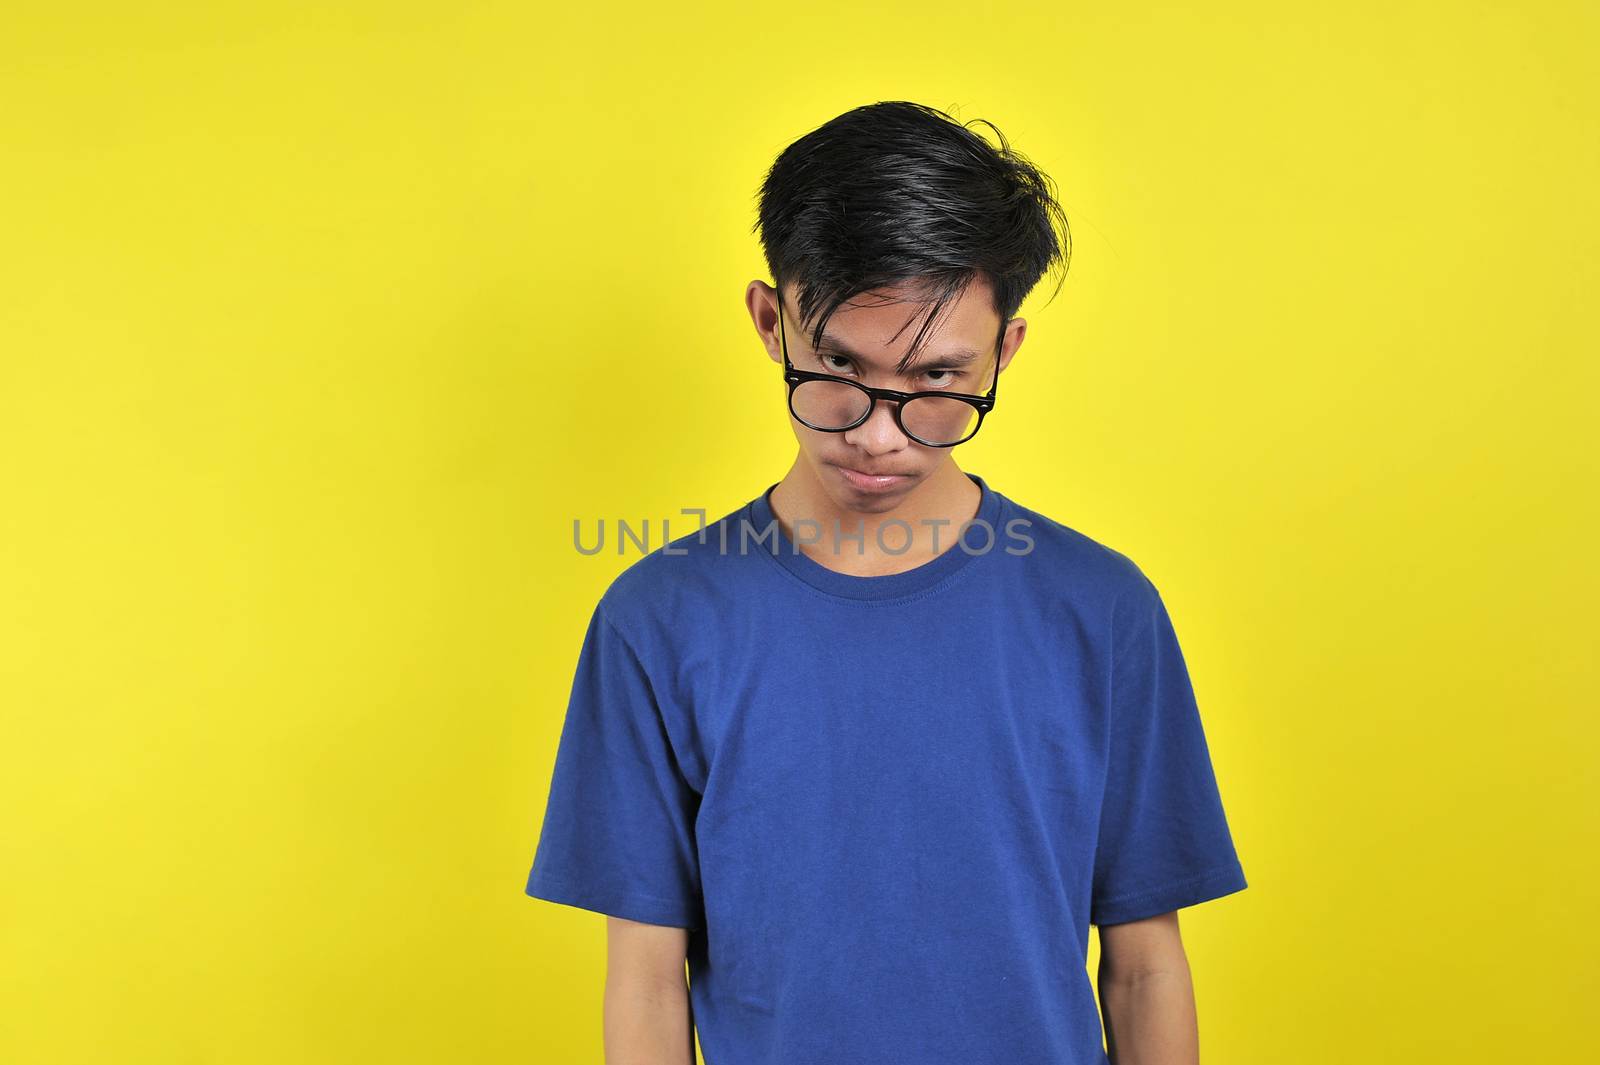 Feeling bored, Young Asian man wearing glasses, isolated on yellow background